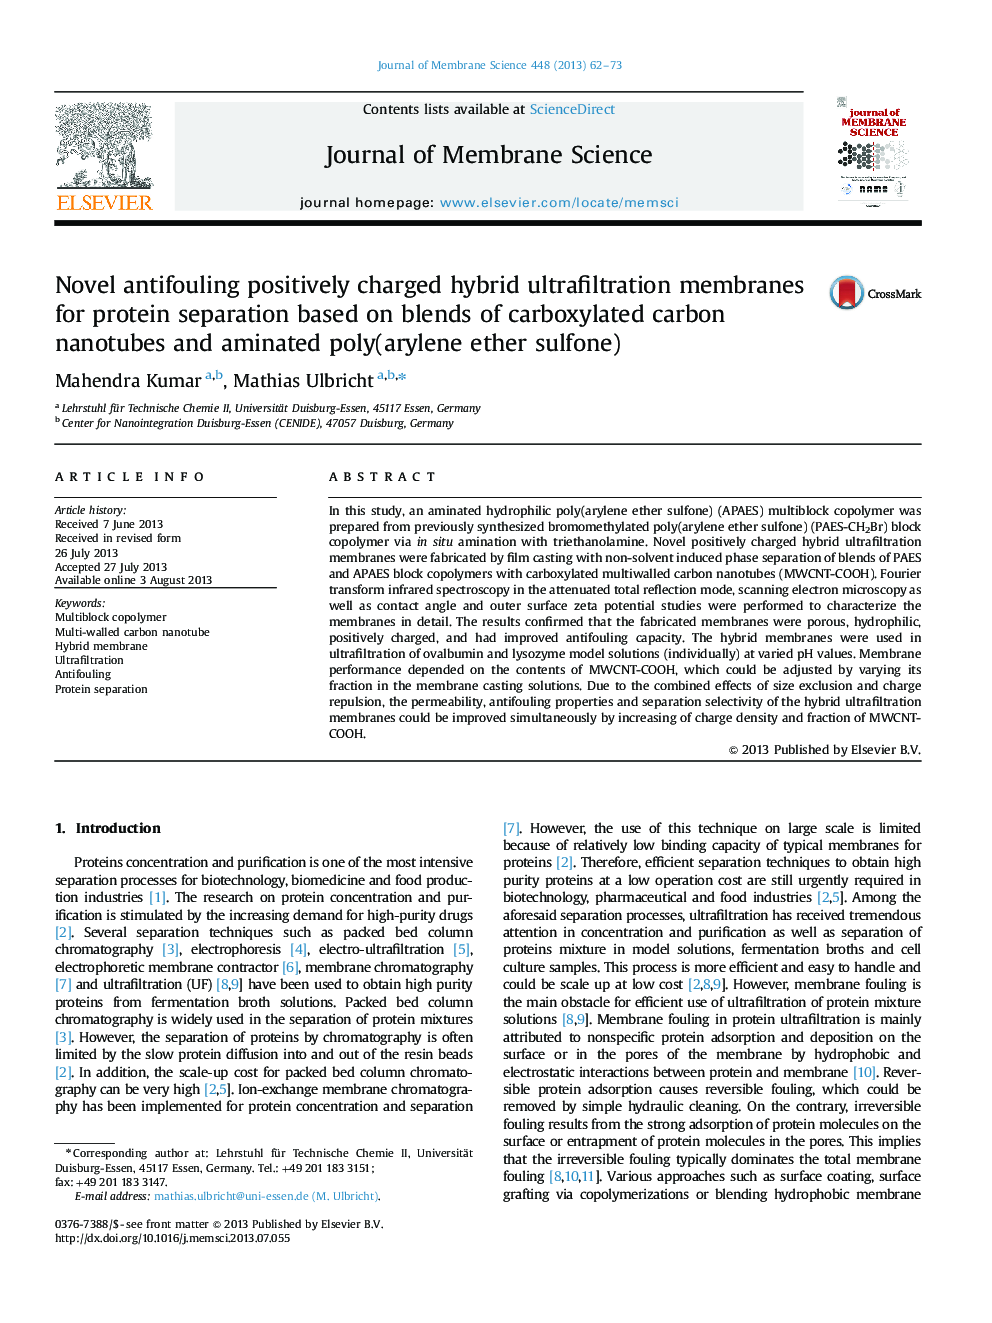 Novel antifouling positively charged hybrid ultrafiltration membranes for protein separation based on blends of carboxylated carbon nanotubes and aminated poly(arylene ether sulfone)